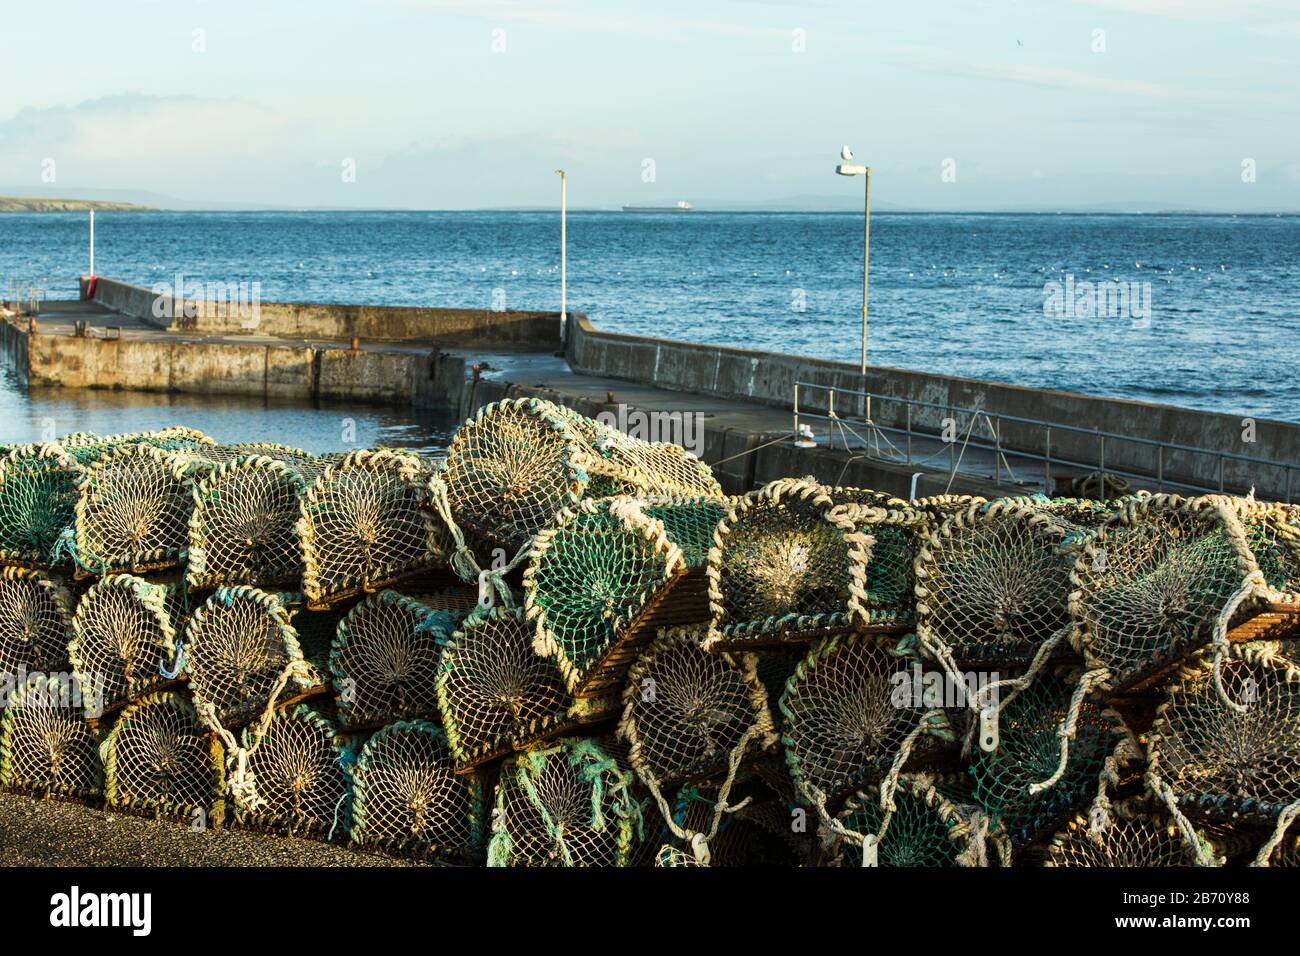 Lobster and crab pots stacked on the quayside harbour wall at John O'Groats, Caithness, Scotland, UK Stock Photo